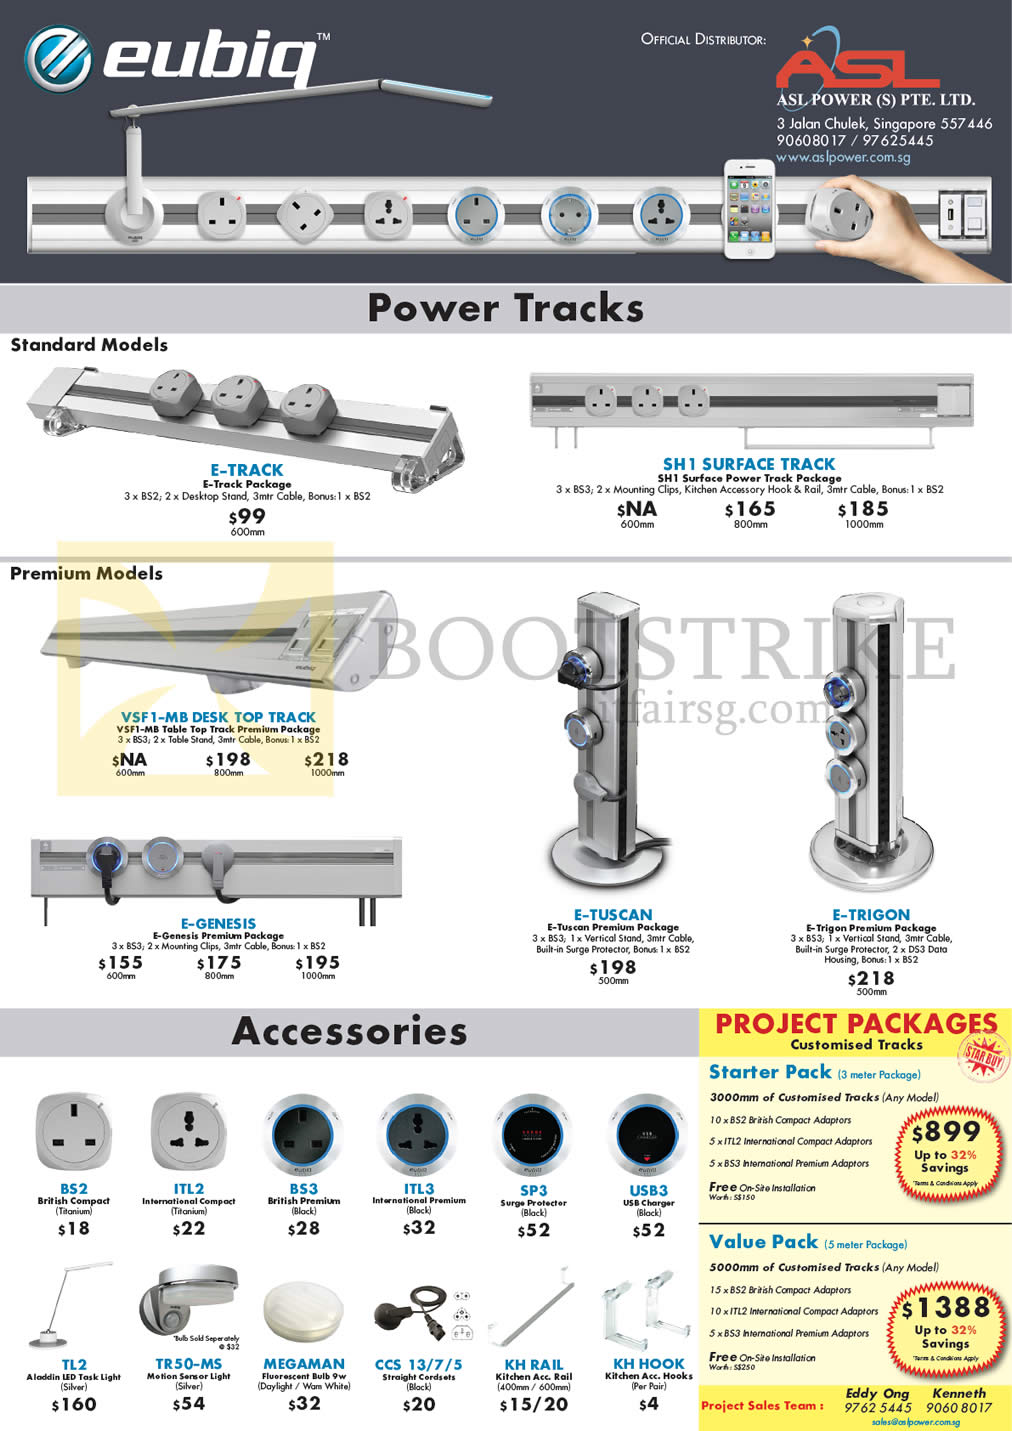 PC SHOW 2013 price list image brochure of Eubiq Power Outlet System Power Tracks, Accessories, Plugs, Packages Starter, Value